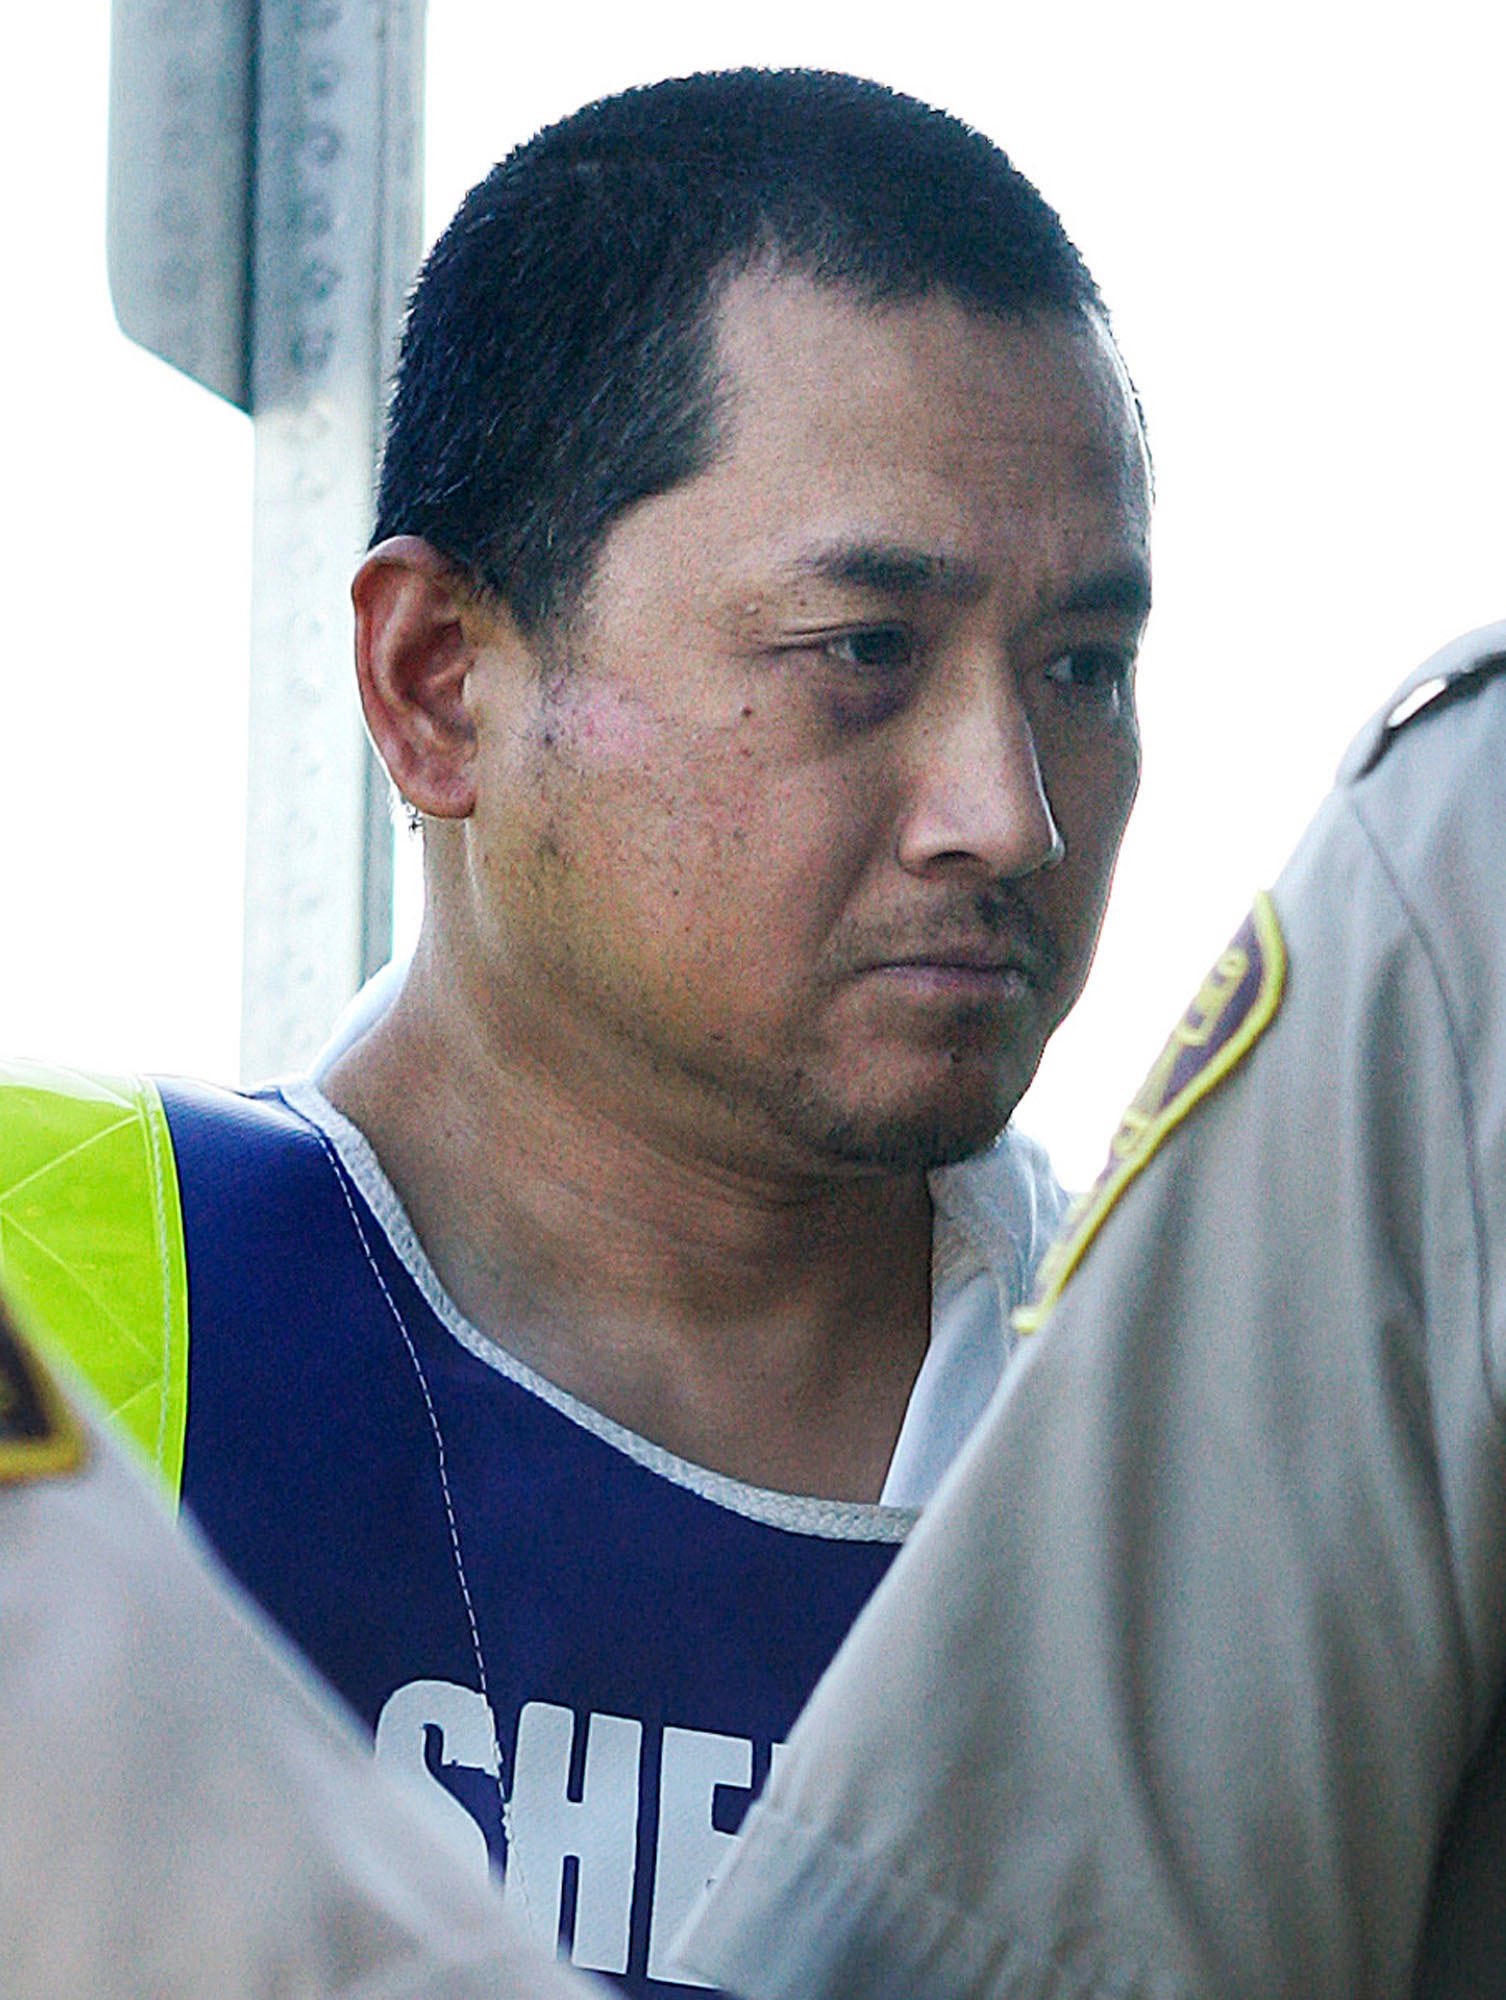 Canadian man who beheaded bus passenger granted total freedom